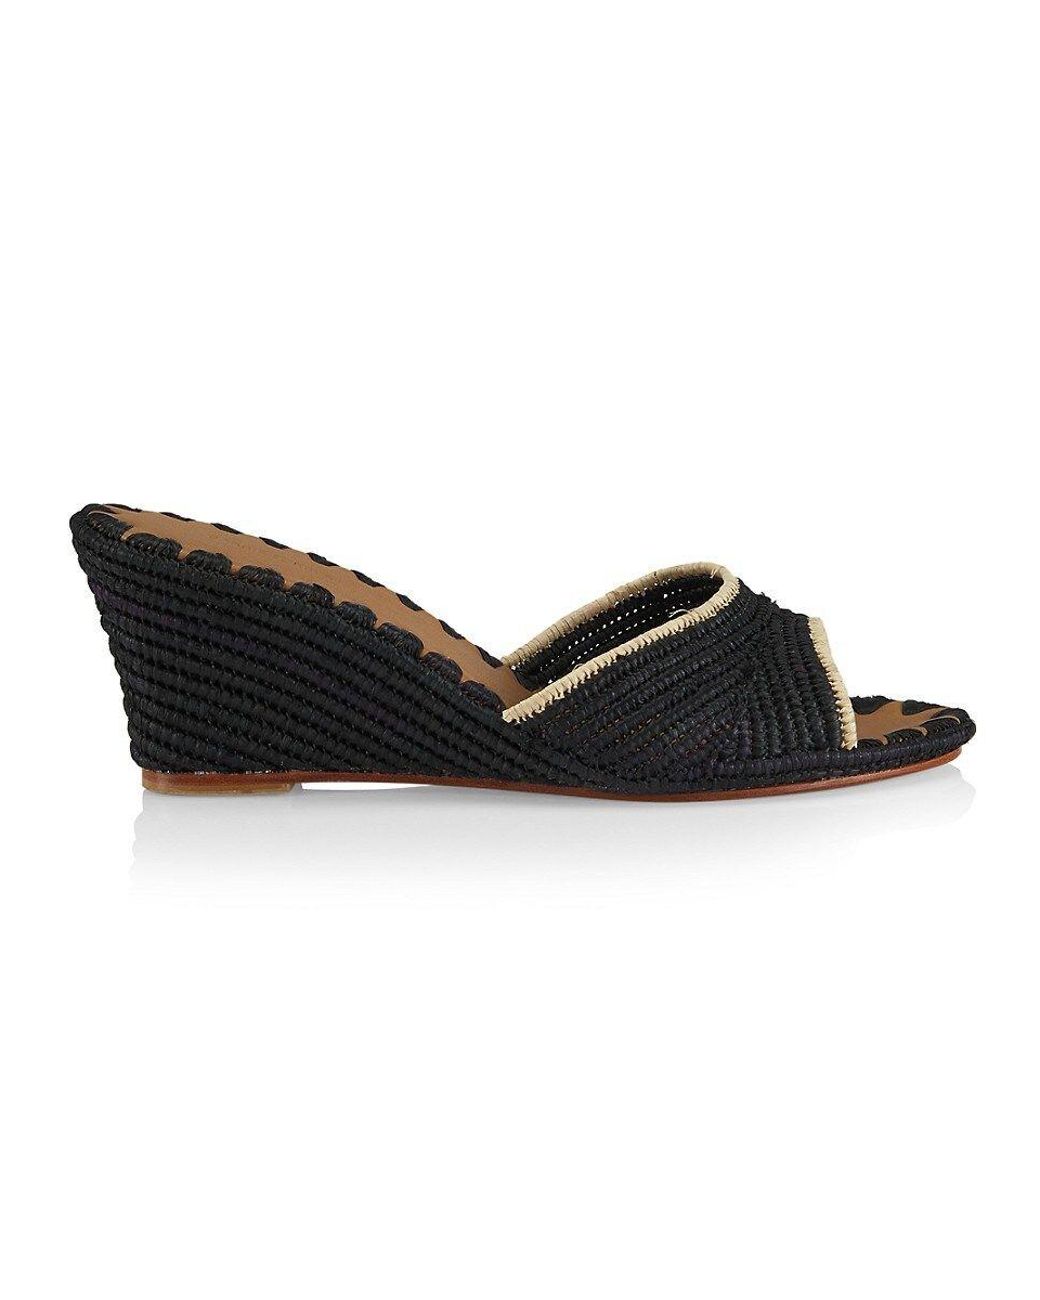 Carrie Forbes Nador Raffia Wedge Sandals in Black | Lyst